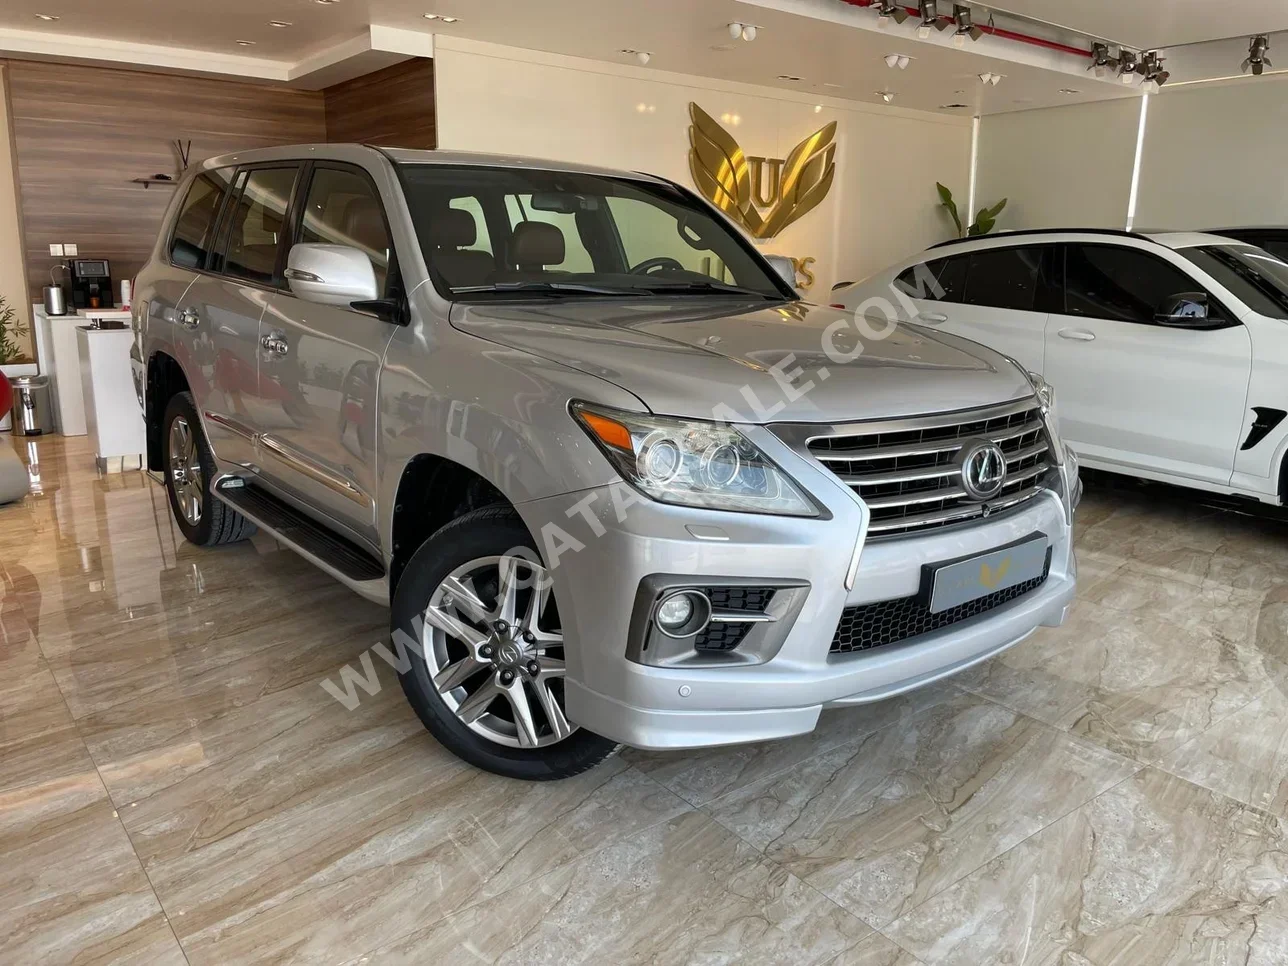 Lexus  LX  570 S  2014  Automatic  267,000 Km  8 Cylinder  Four Wheel Drive (4WD)  SUV  Silver